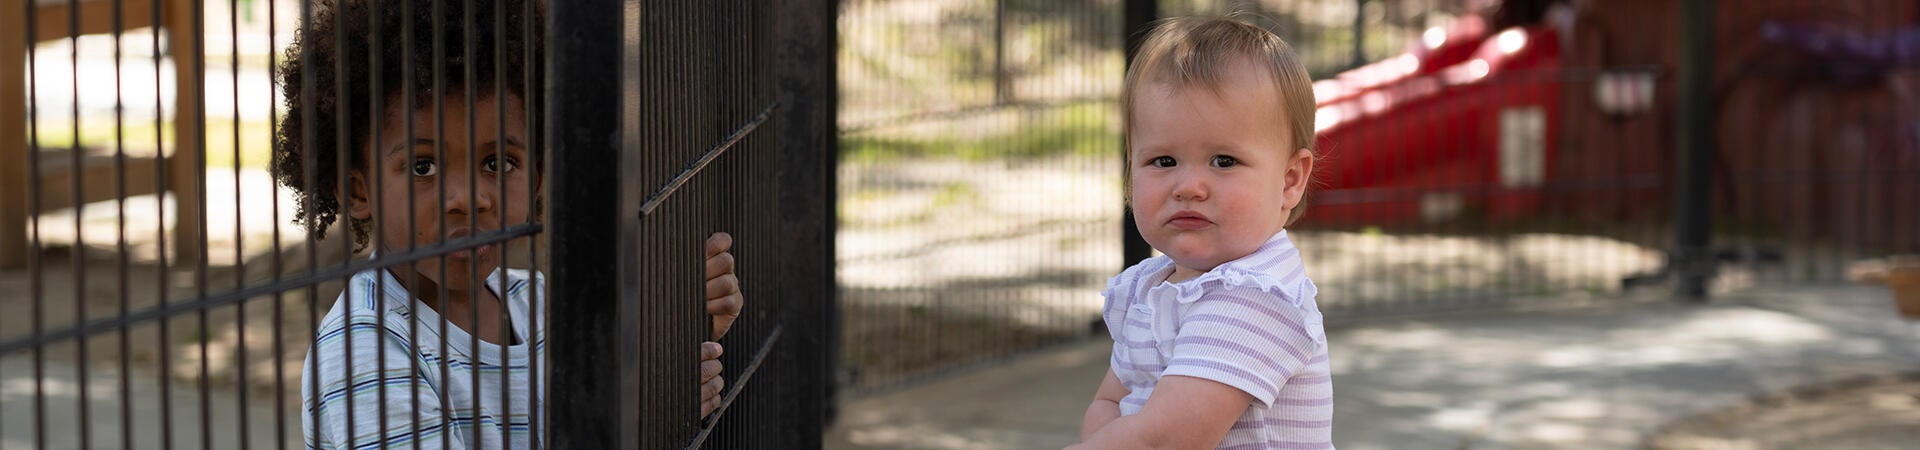 infant looking at older child at fence